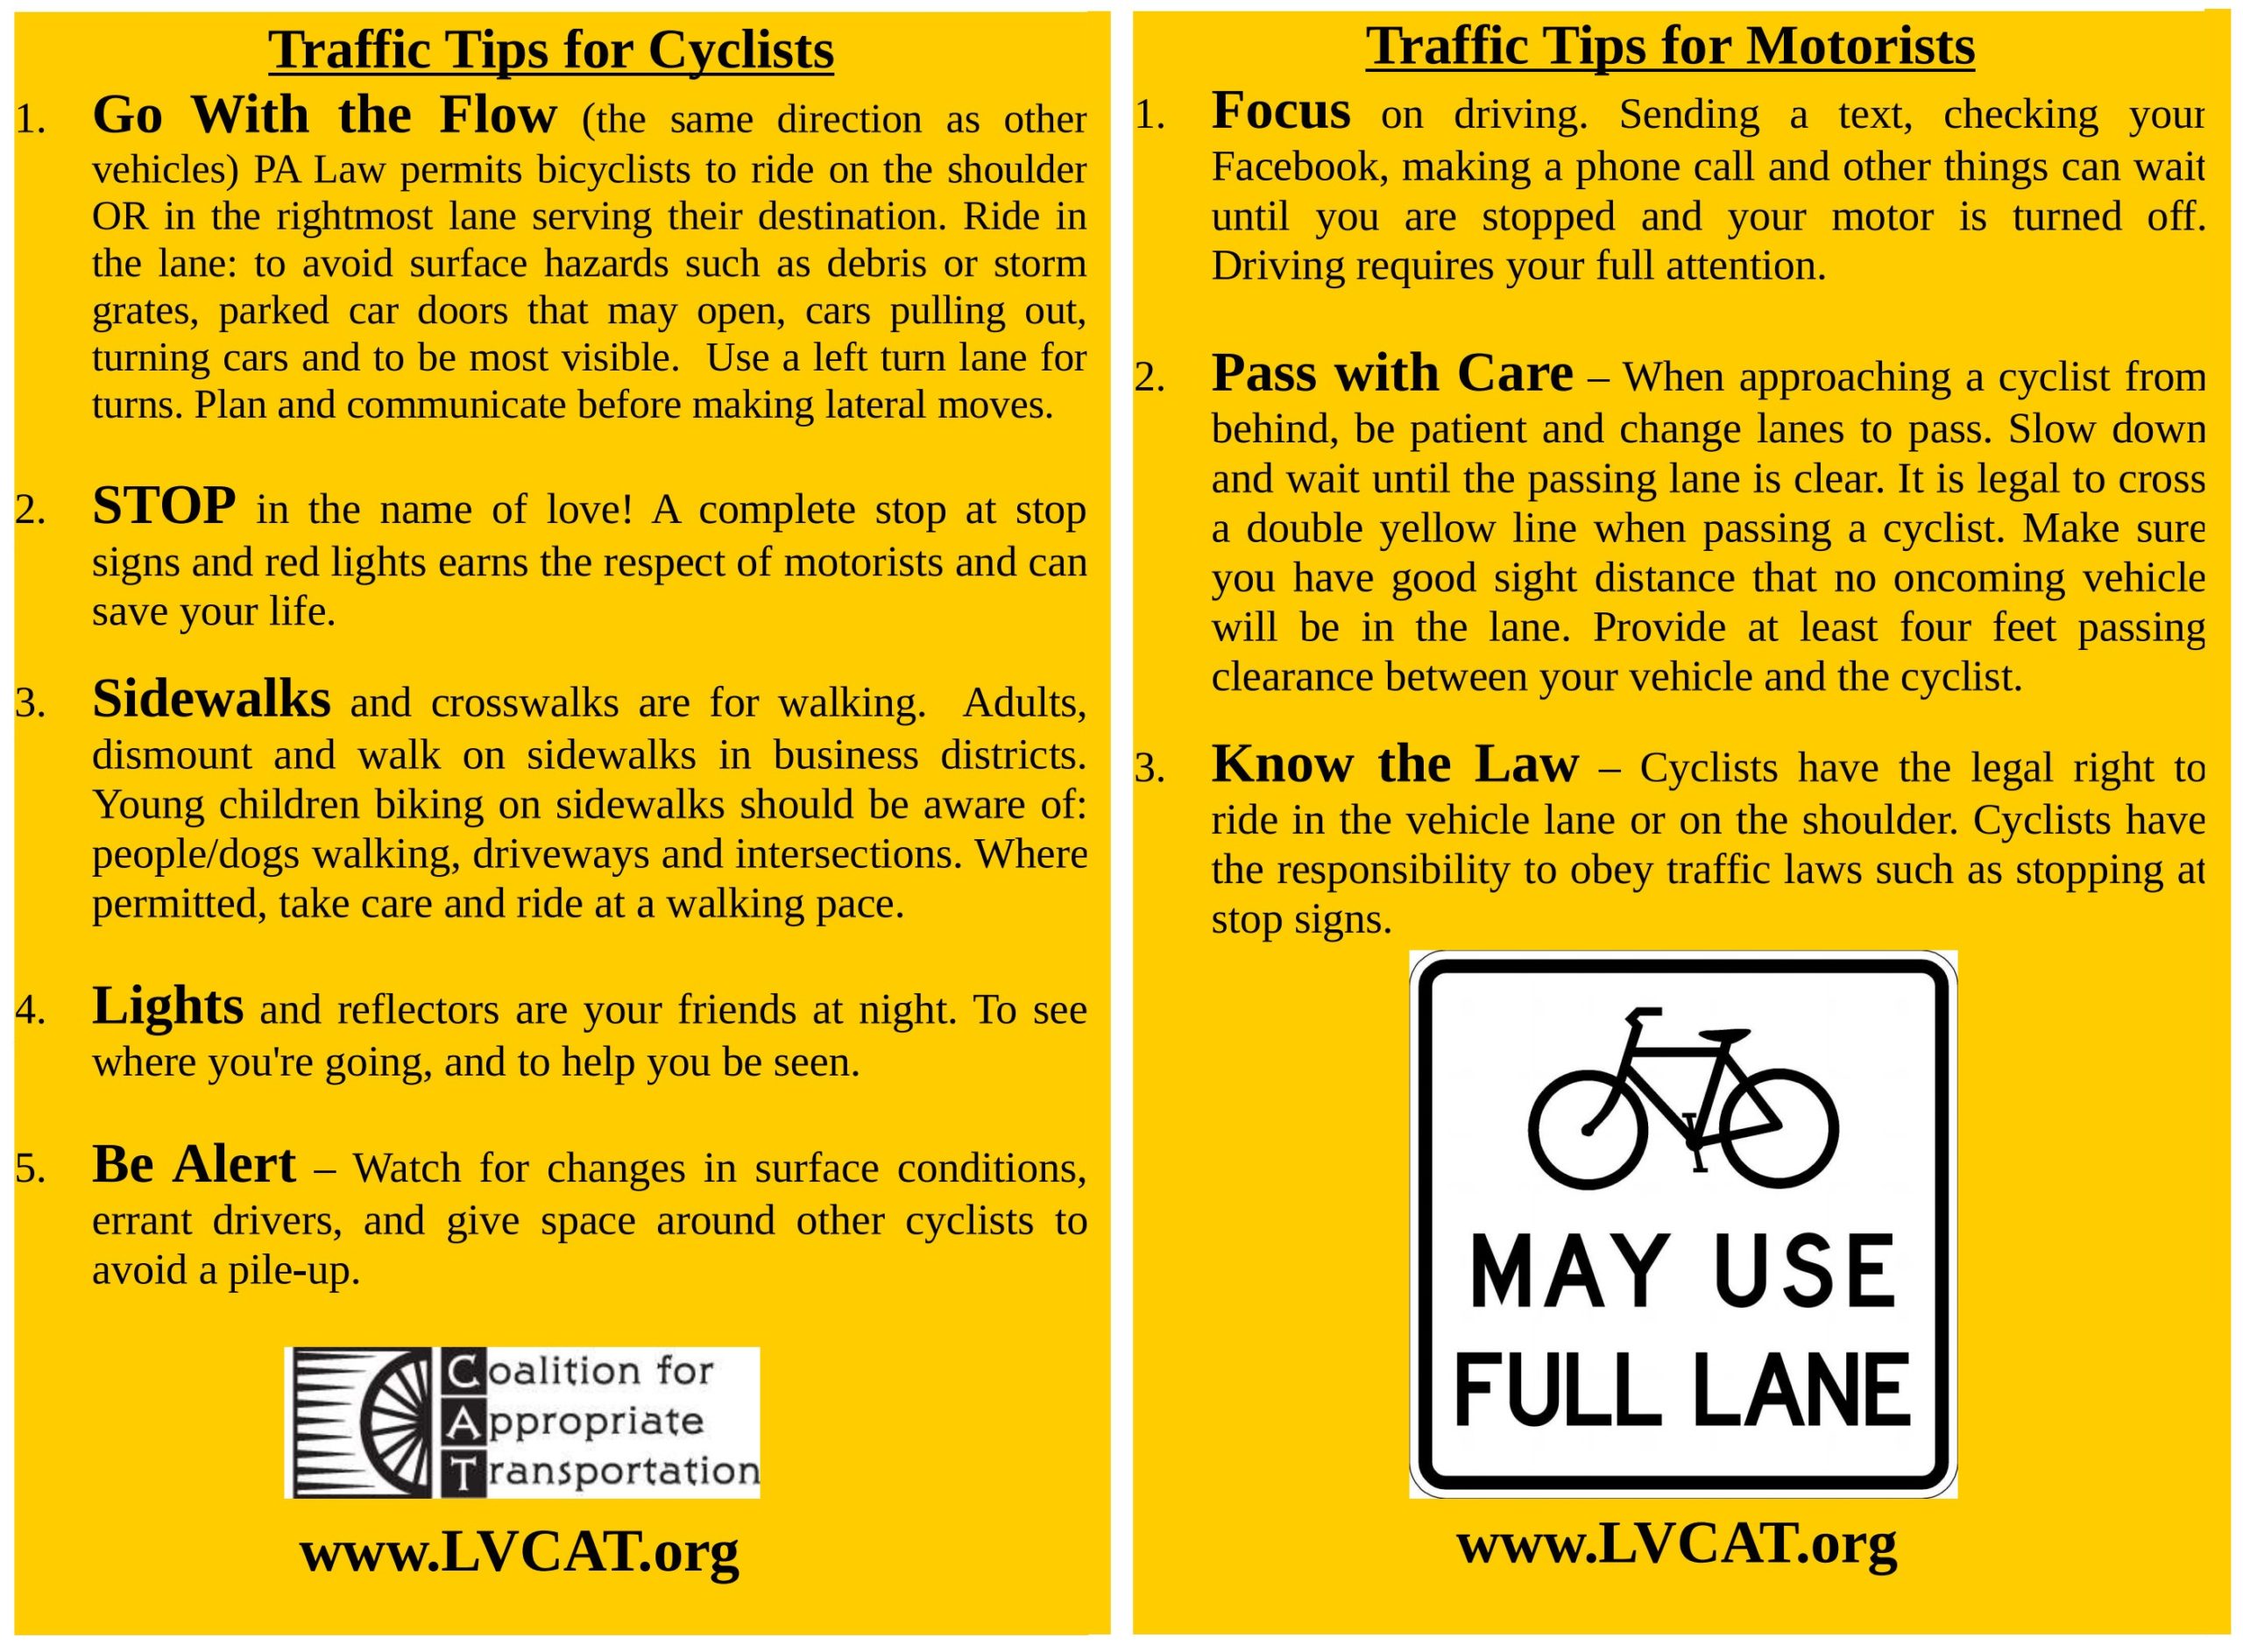 Top Traffic Tips for Cyclists and Motorists